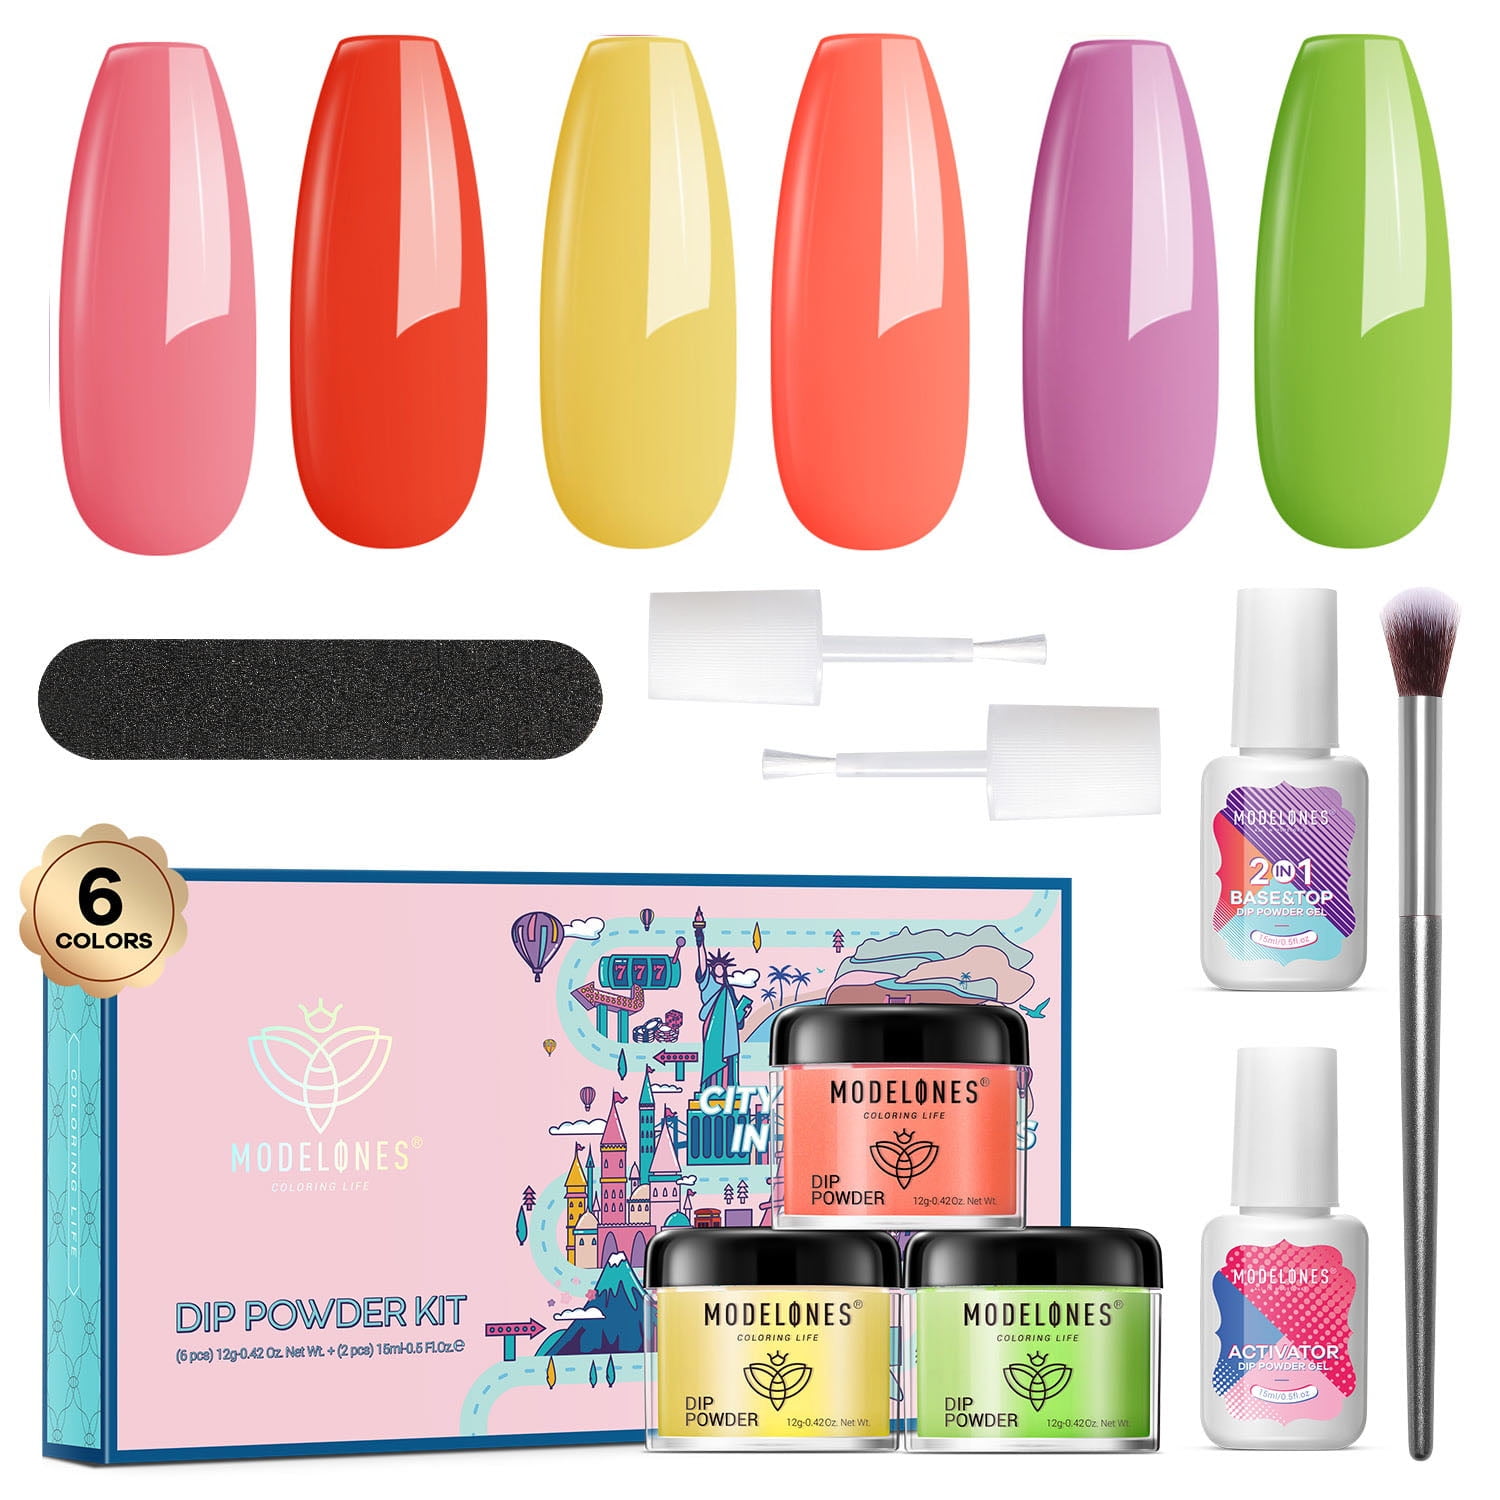 Dip Powder Nails The Original Dipping Powder SNS Nails Australia |  Multicolor Dipping Powder Starter Kit With Brush Dip Powder Nail Kit For  Starter Essential Portable Kit For Travel Nail Manicure Accessories